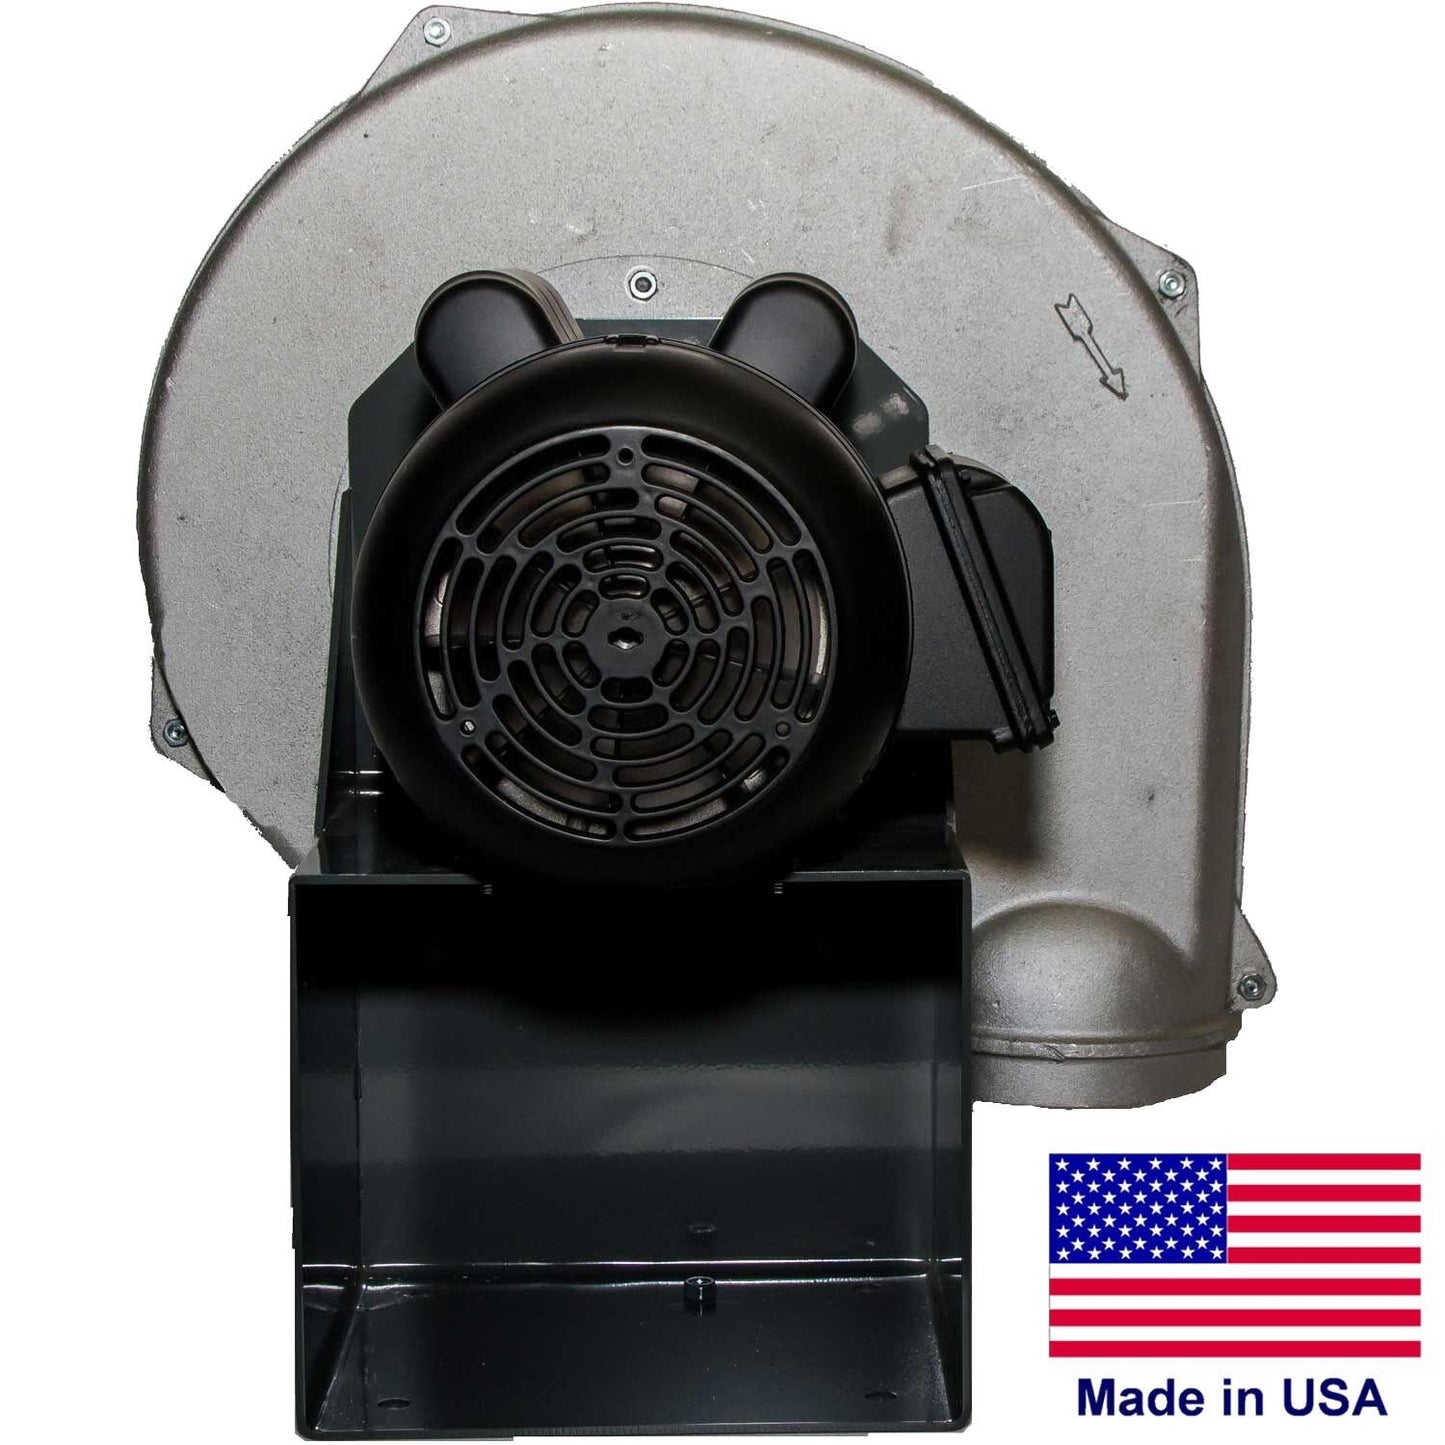 ALUMINUM CENTRIFUGAL BLOWER - 571 CFM - 115/230V - 1 Ph - 3/4 Hp - 6" In/ 5" Out